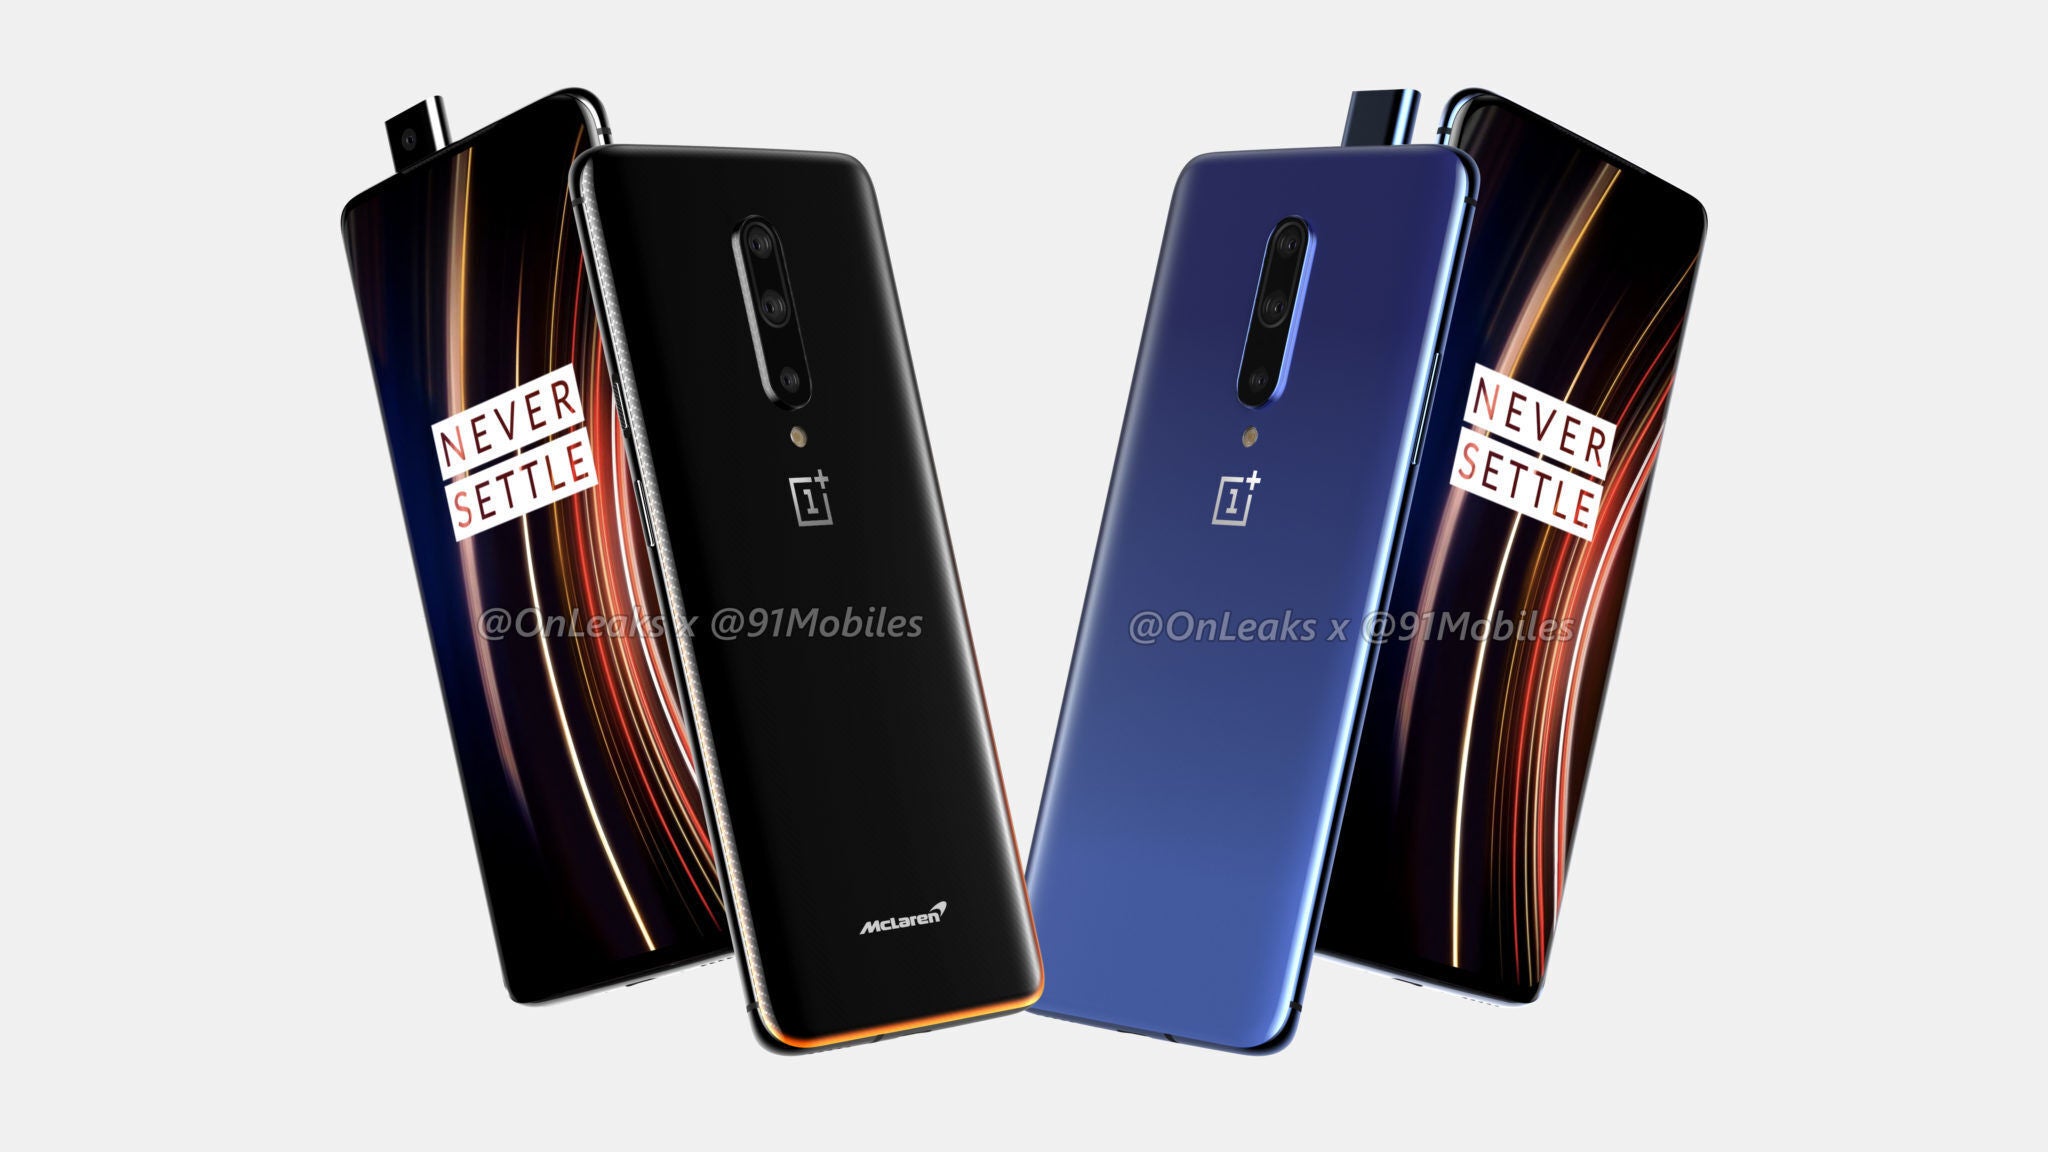 Alleged OnePlus 7T Pro renders - All the exciting new smartphones coming out in September 2019